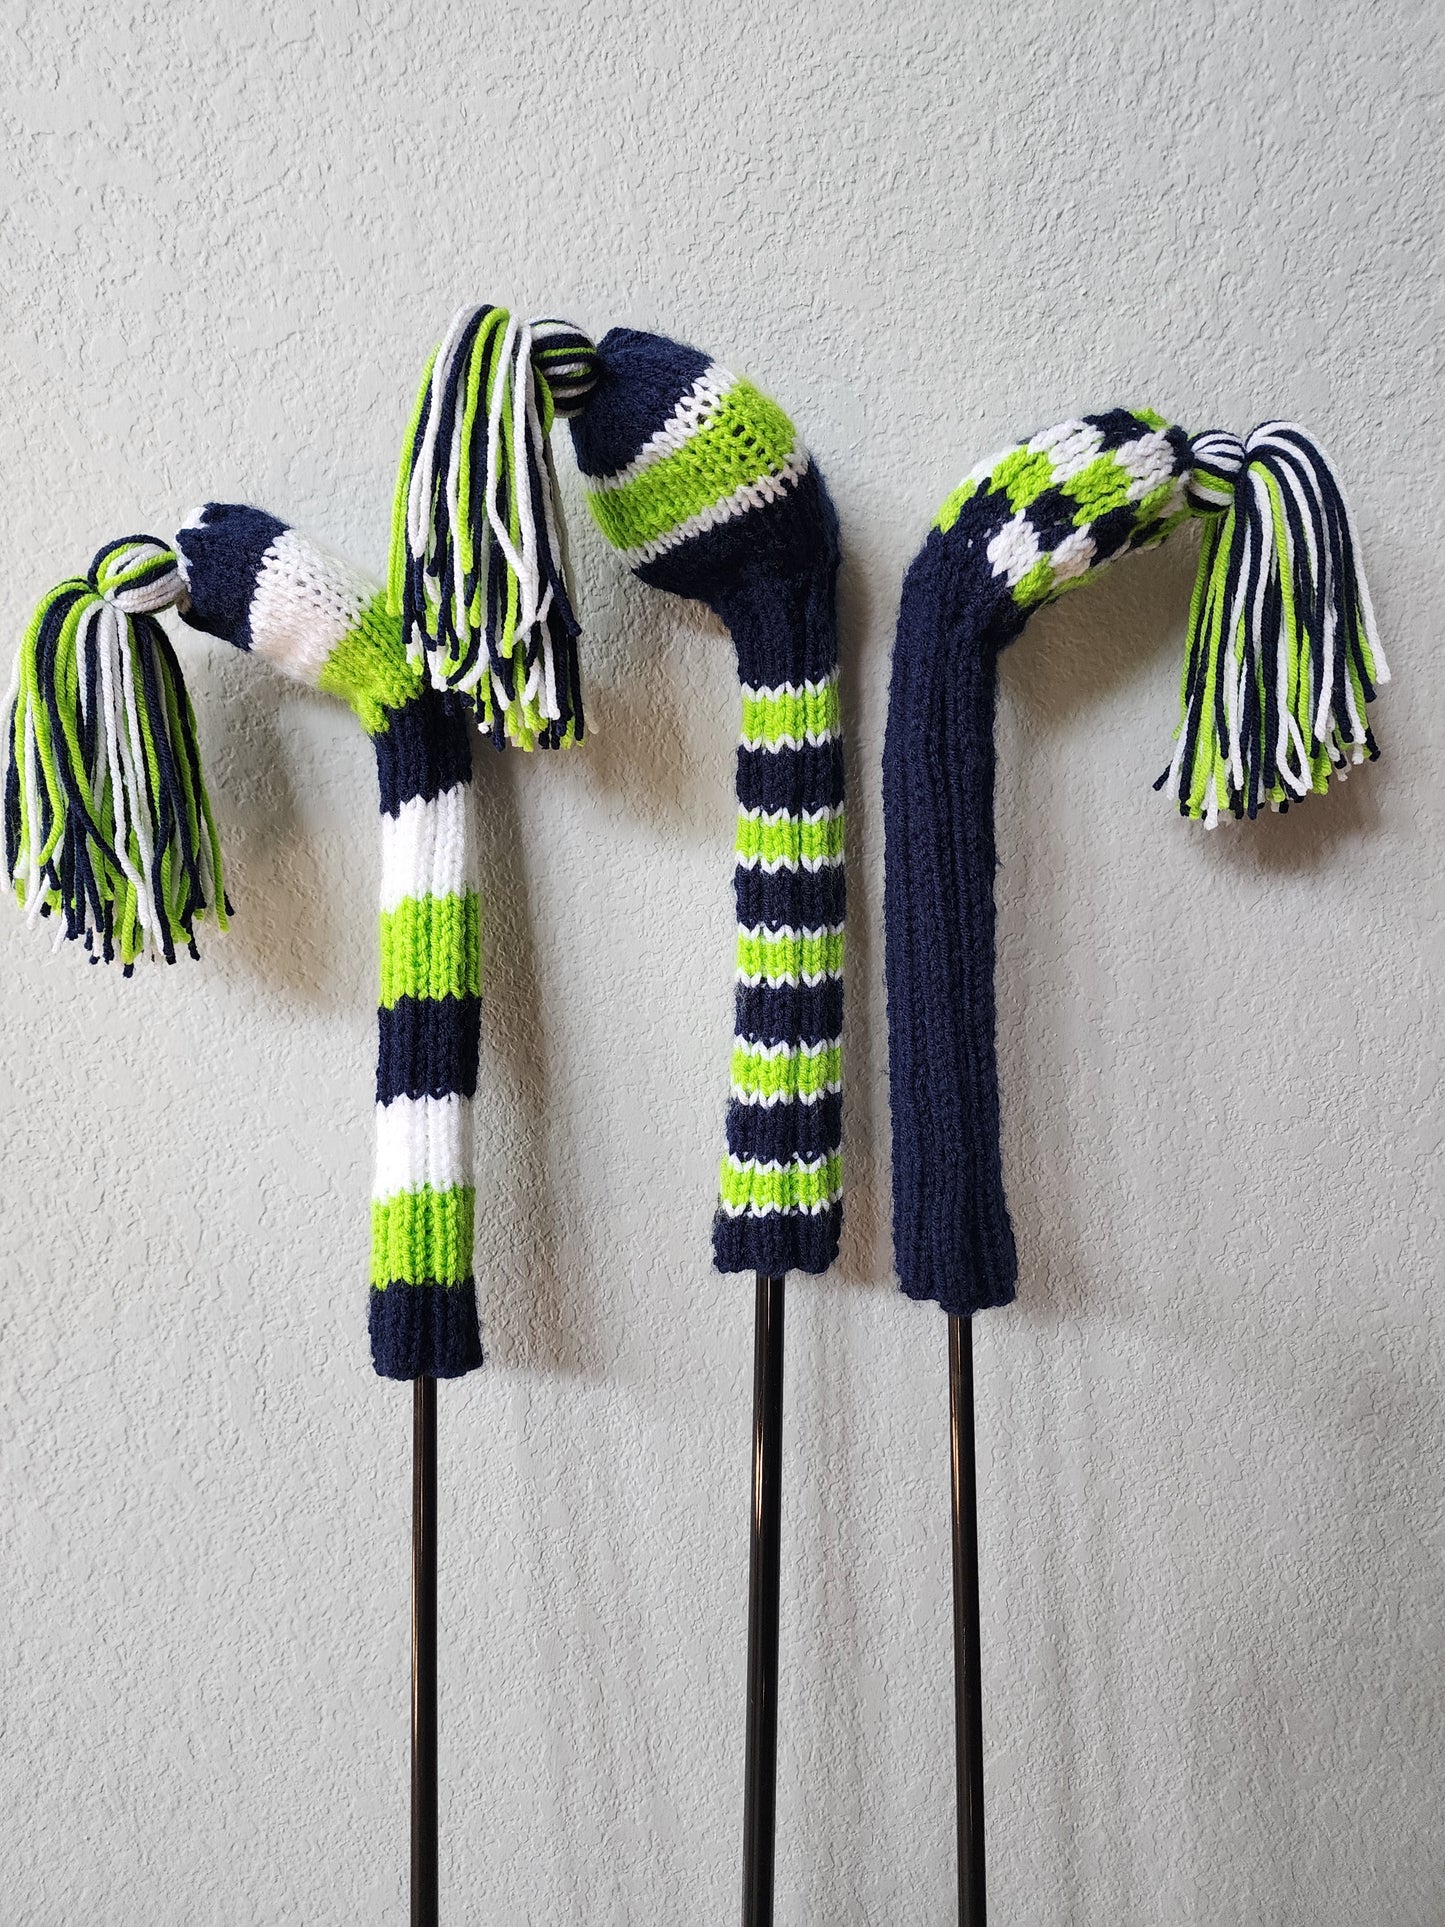 Hand Knit Golf Club Head Covers Retro-Vintage Navy, Lime Green & White with Tassels for Driver & Fairway Woods - Austinknittylimits